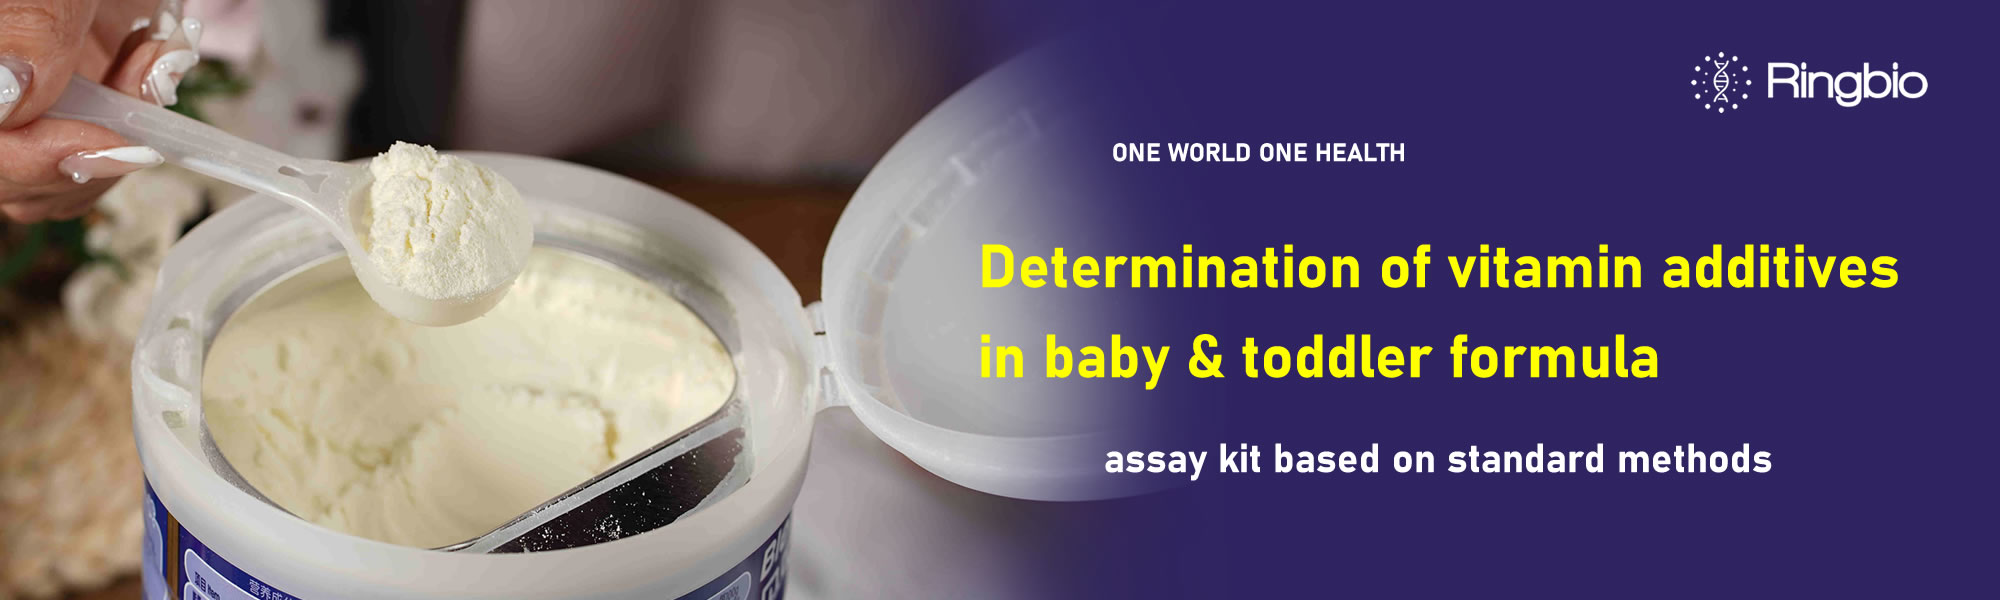 Determination of nutritional additives in baby and toddler formula